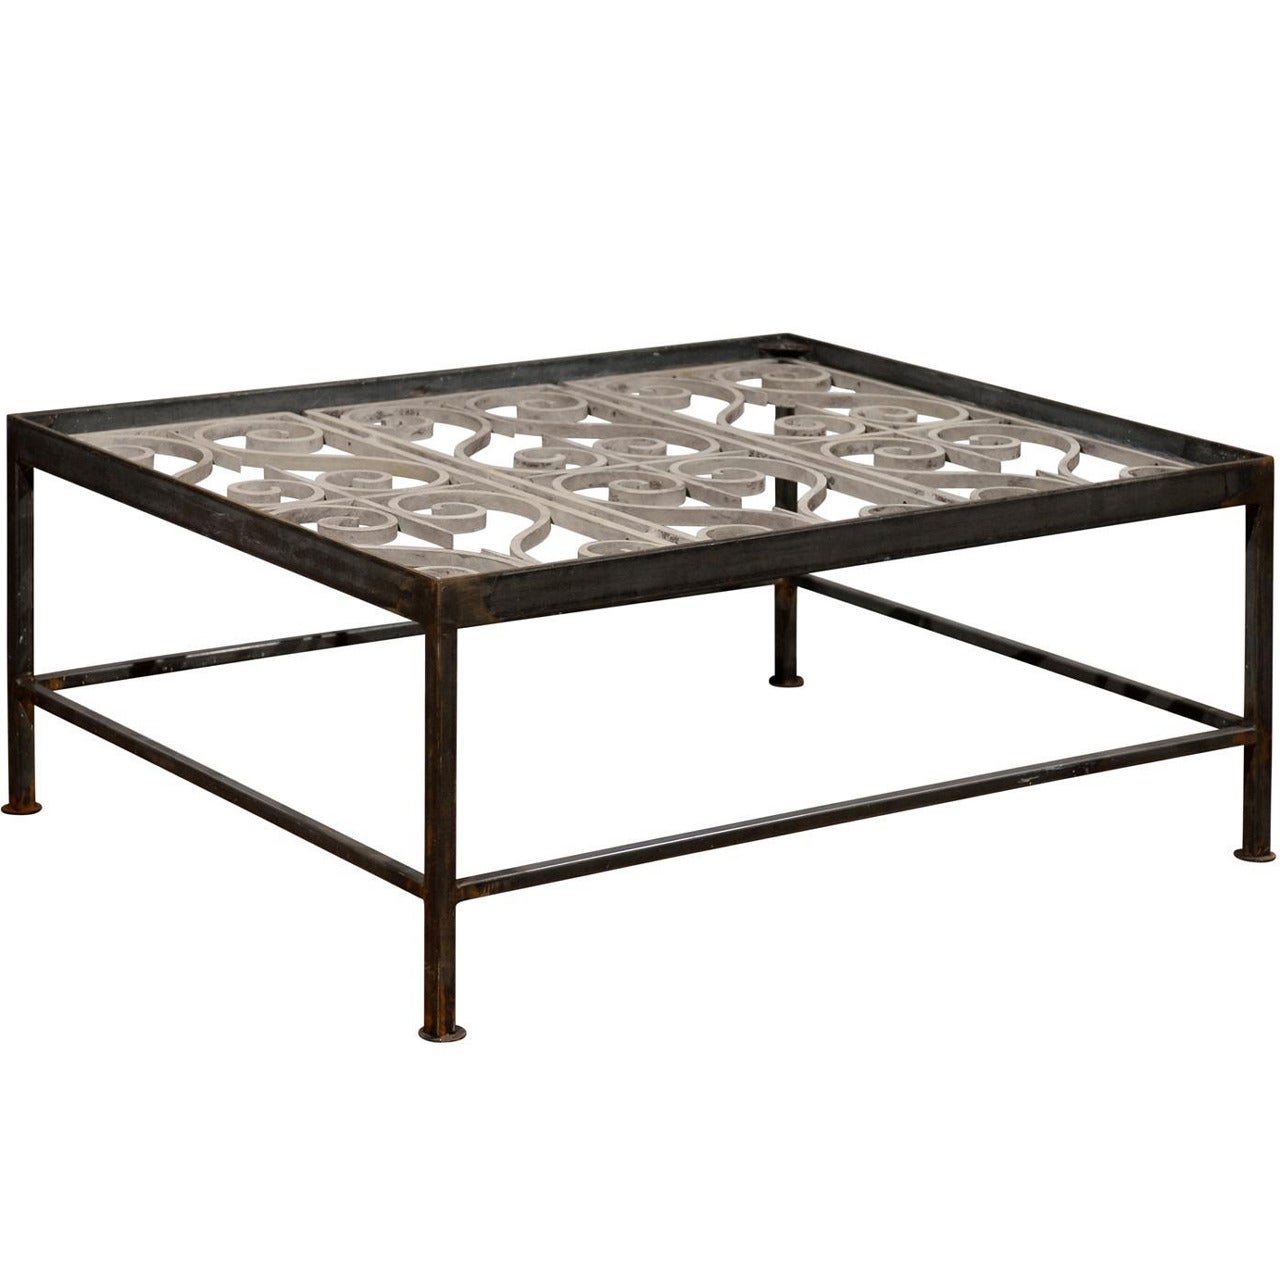 Iron Rectangular Coffee Table Made of French 1850s Painted Ironwork Balcony